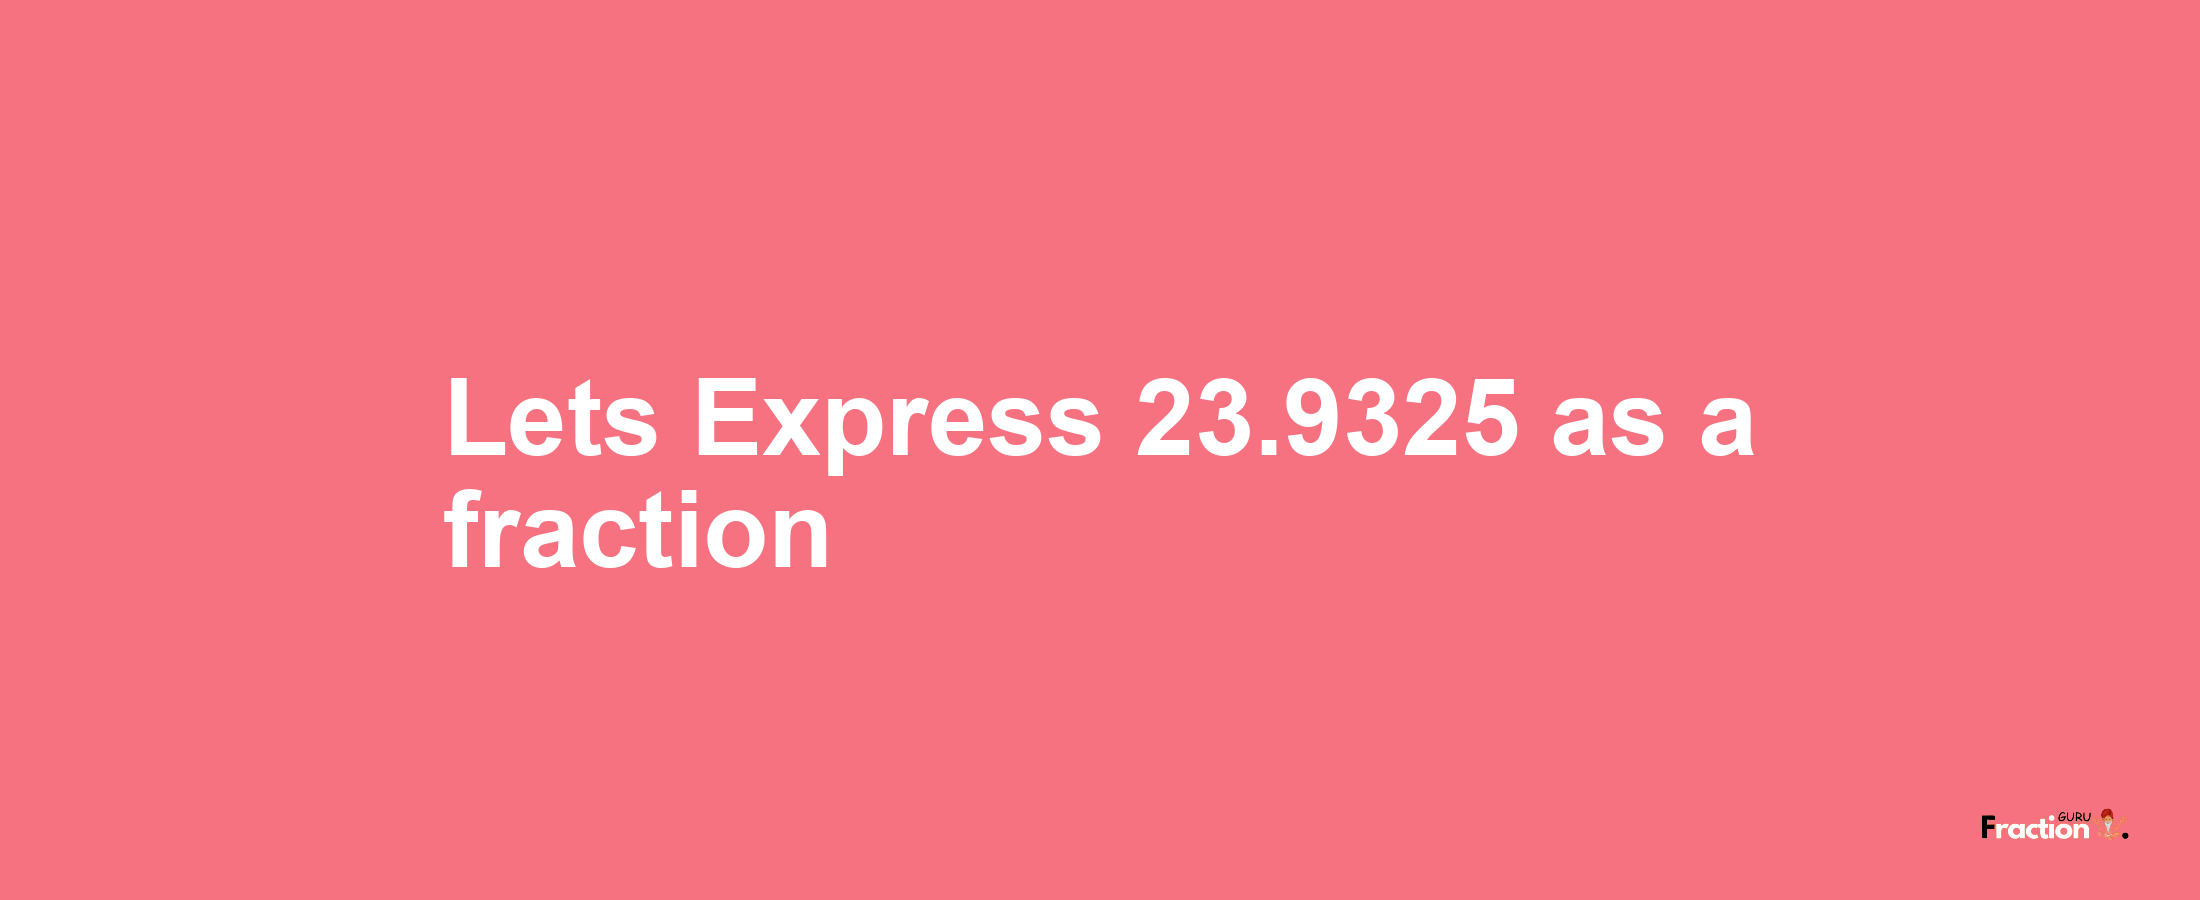 Lets Express 23.9325 as afraction